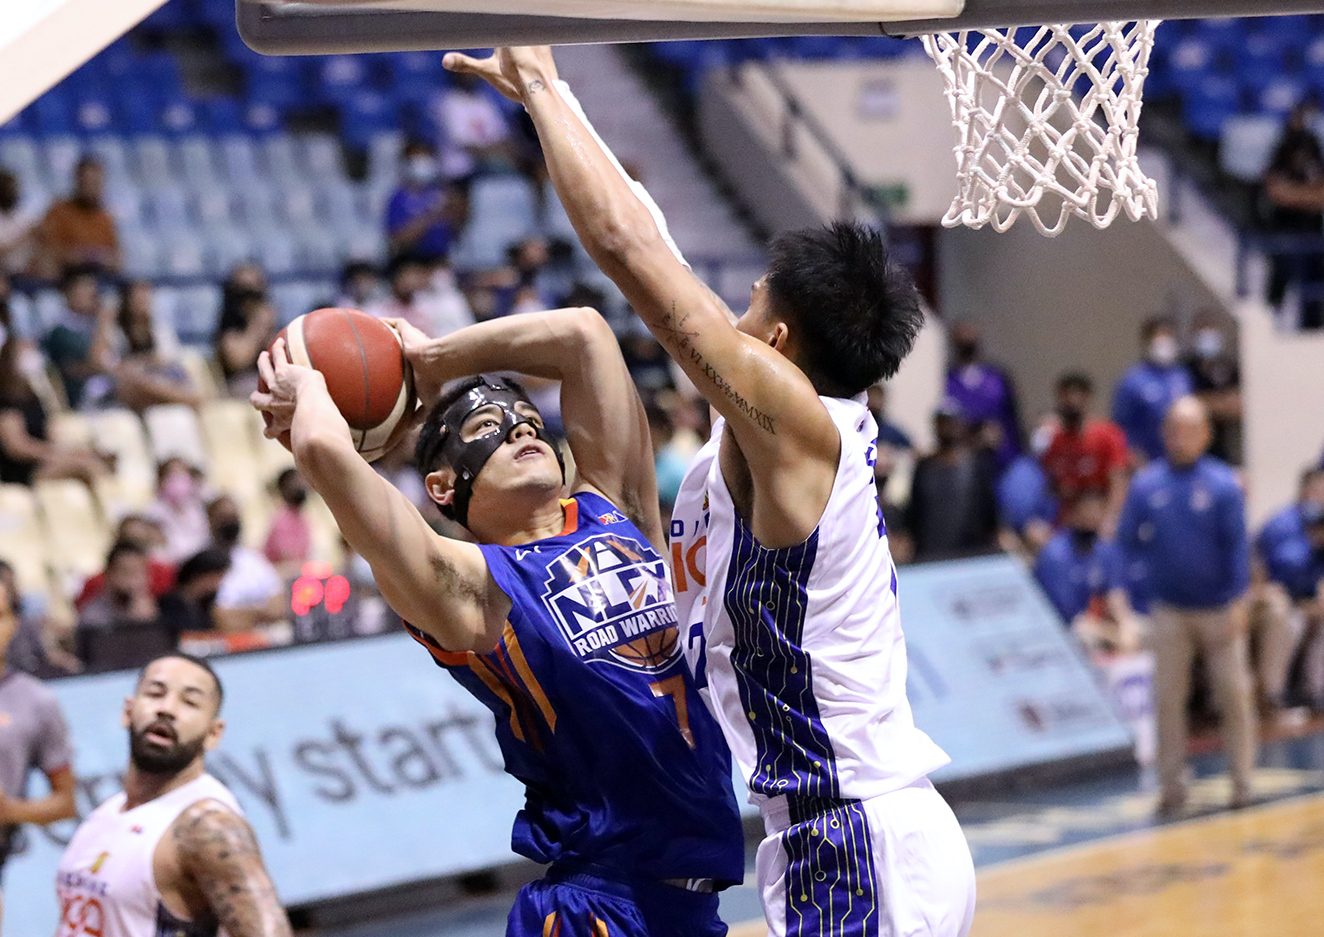 Yeng Guiao lauds Kevin Alas for big plays after tongue-lashing